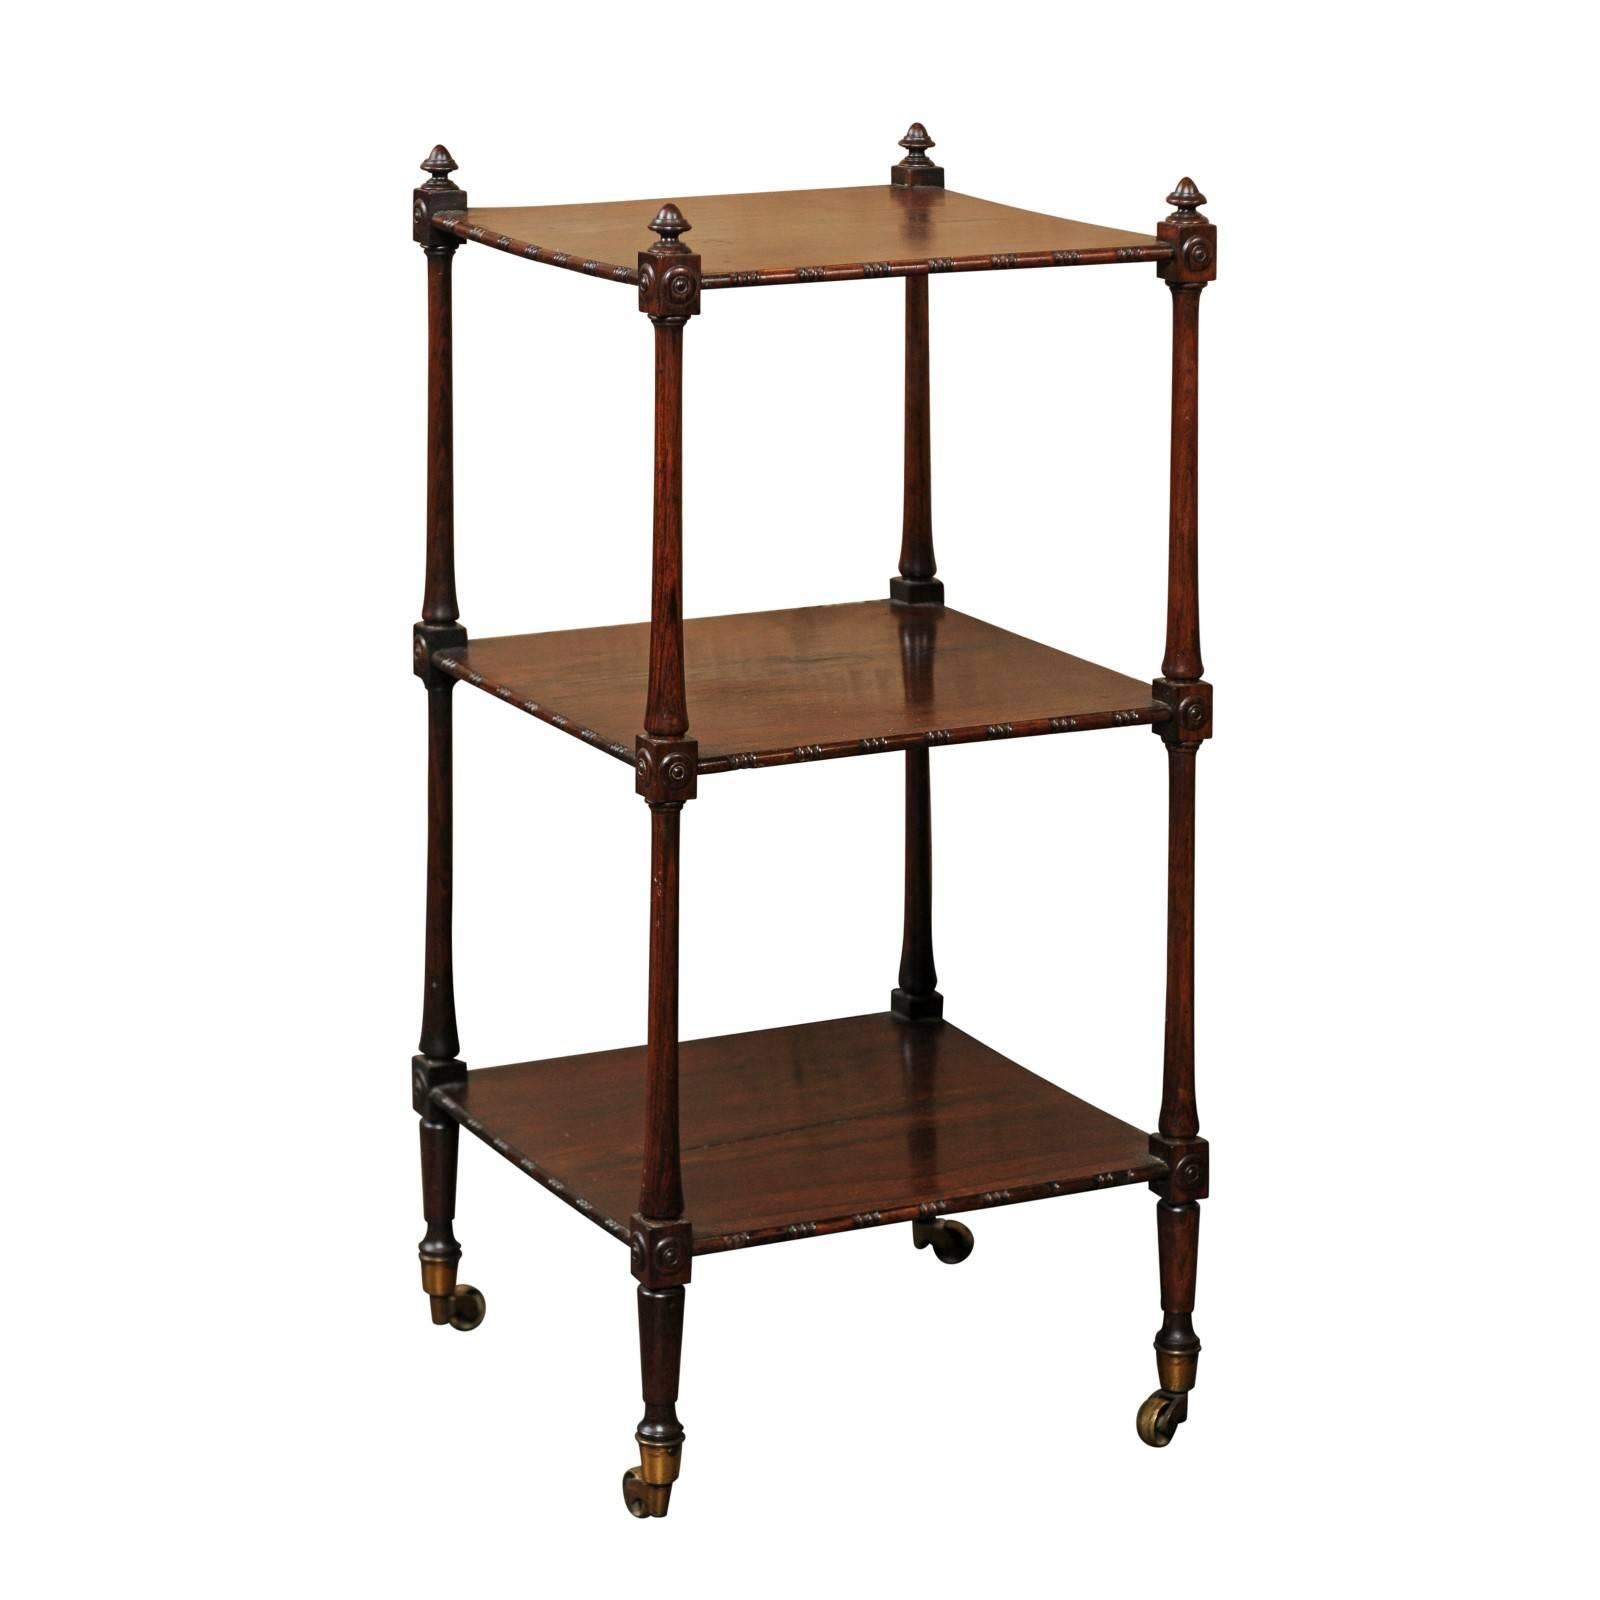 English 1850s Rosewood Three-Tiered Trolley with Carved Side Posts and Casters For Sale